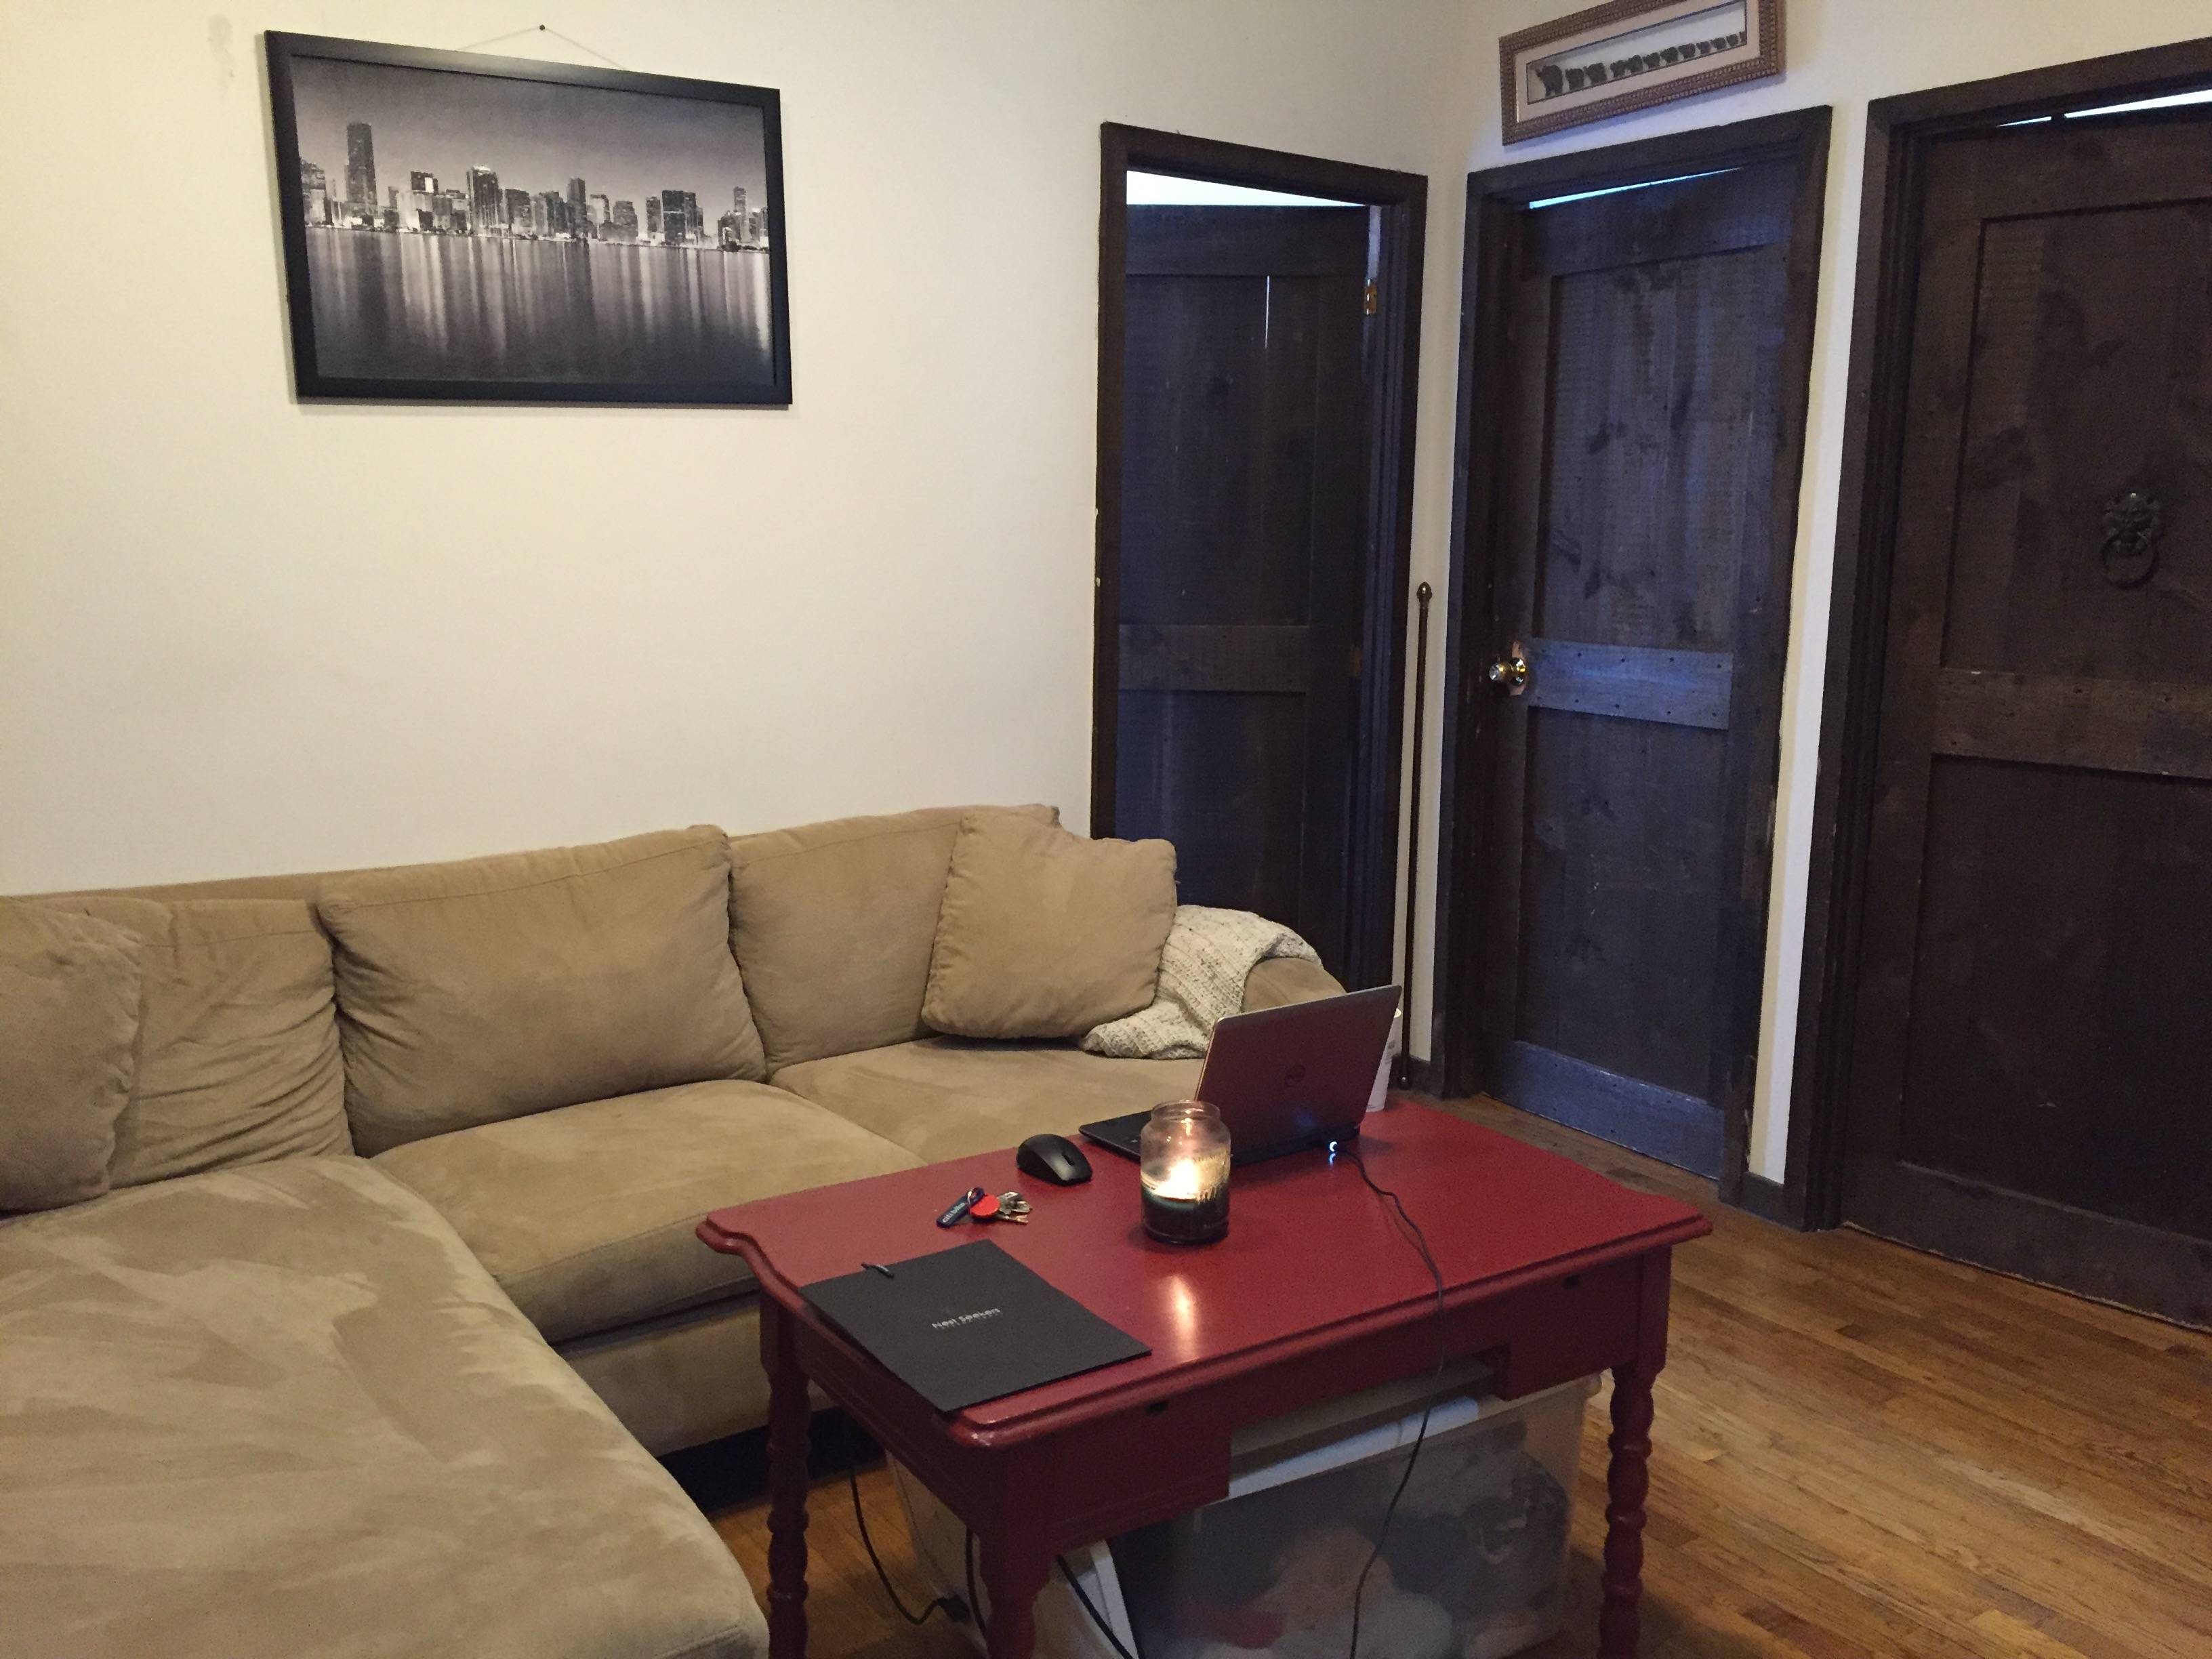 East Village: 4 Bedroom Available August 1st